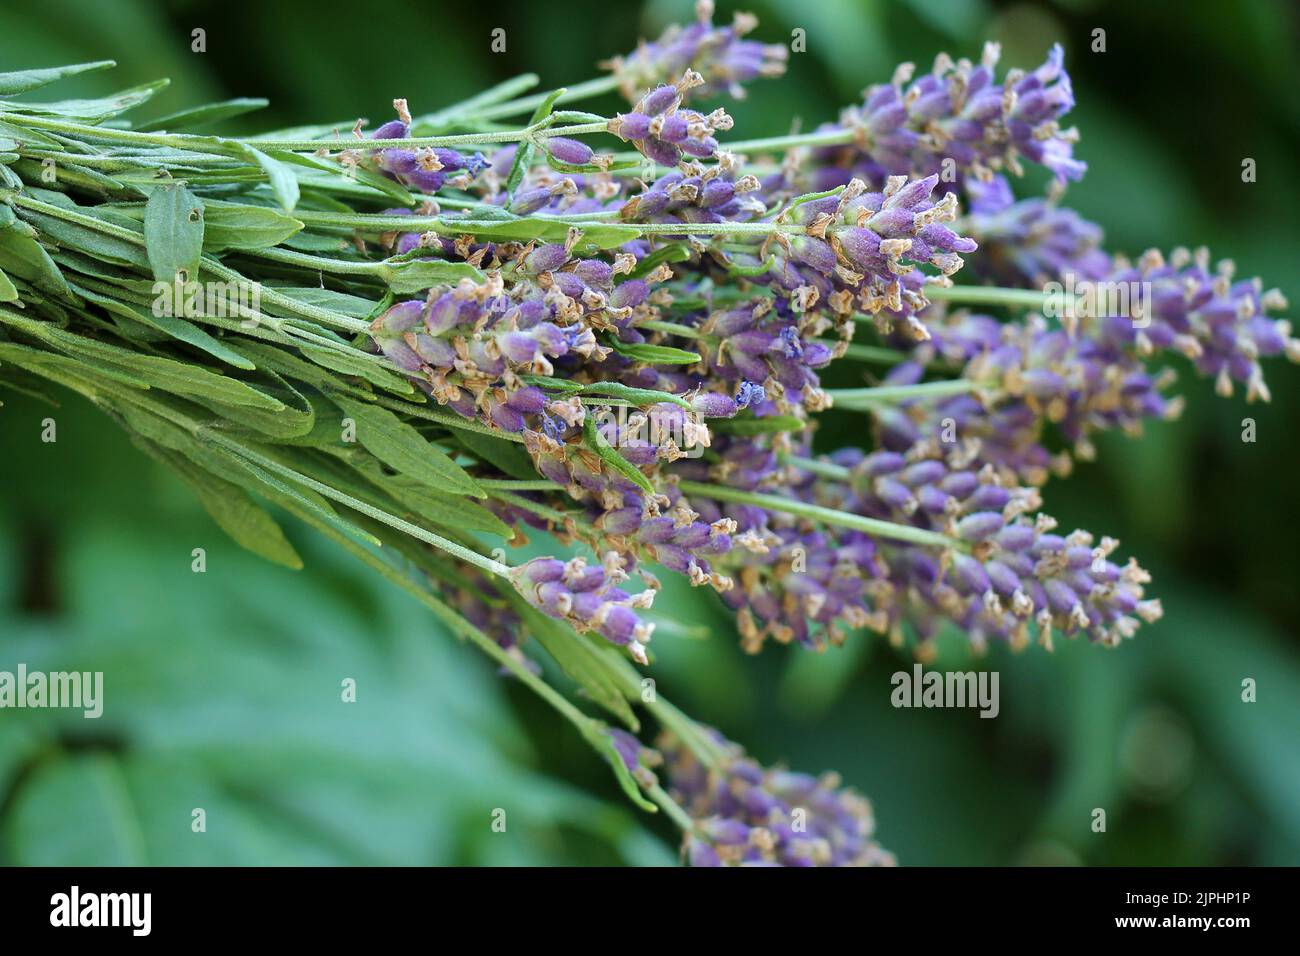 Bunch of fresh lavender flowers on natural green defocused background. Stock Photo